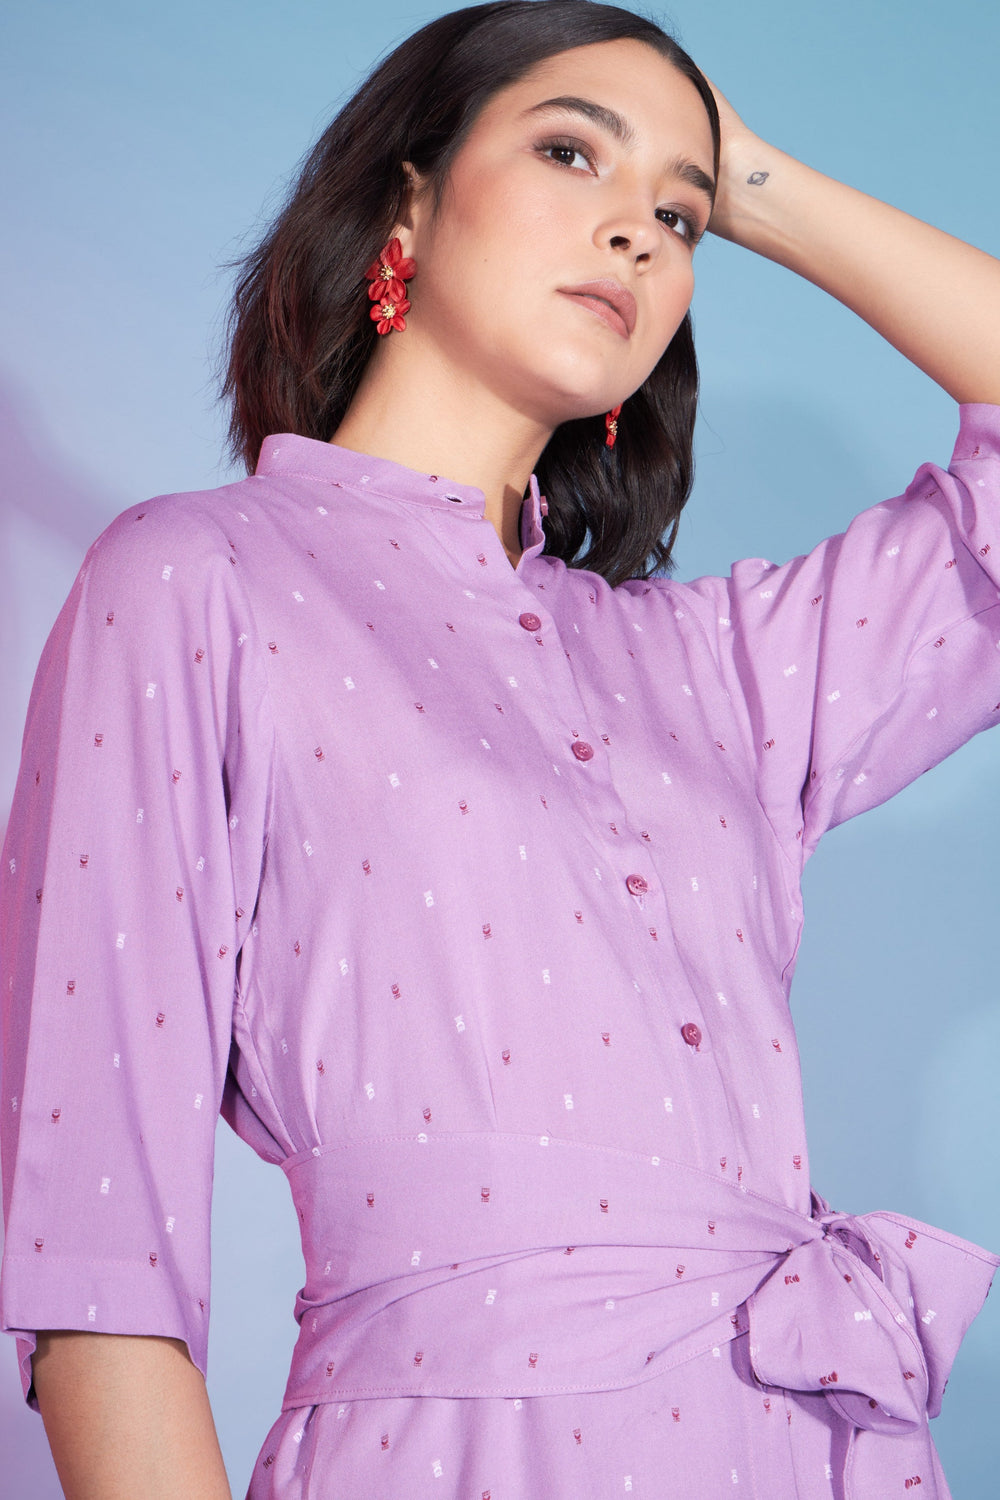 Elegant Purple Westernwear: Viscose Rayon, Designer Co-Ords for Party Chic